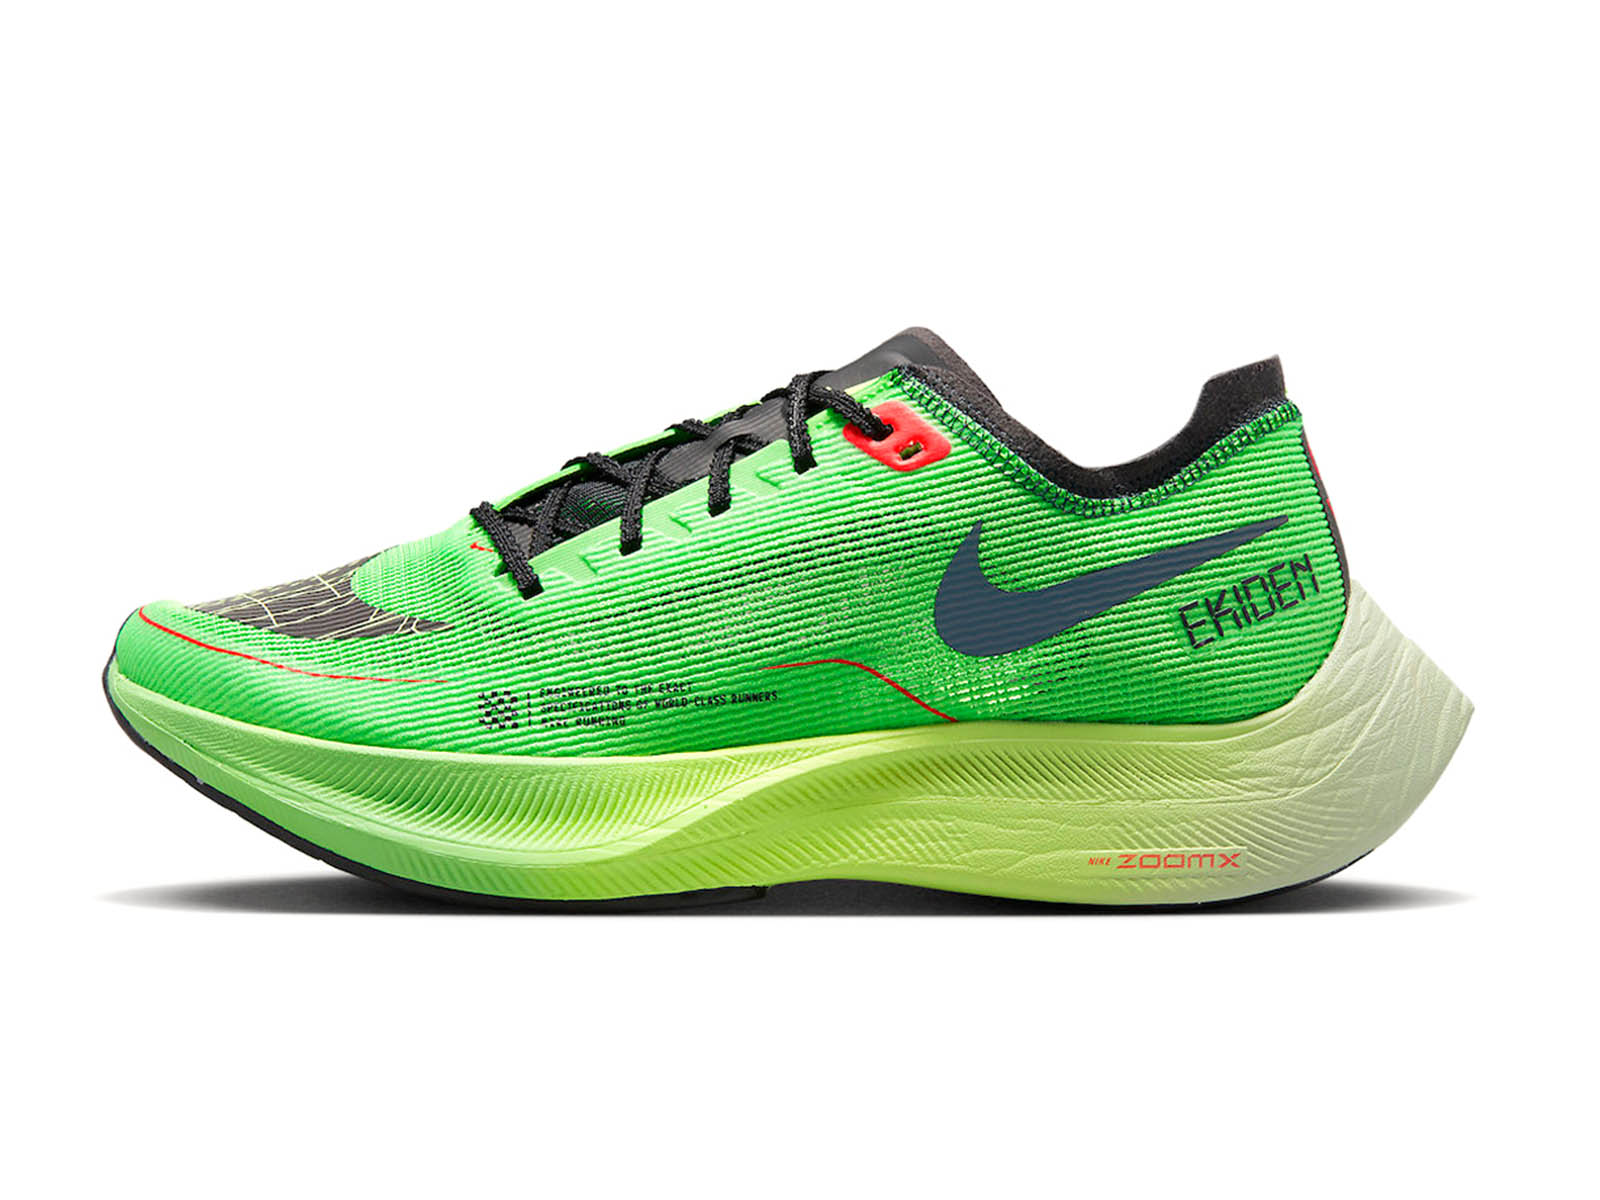 The Nike ZoomX Vaporfly Next% 2 in ‘Ekiden’ has arrived